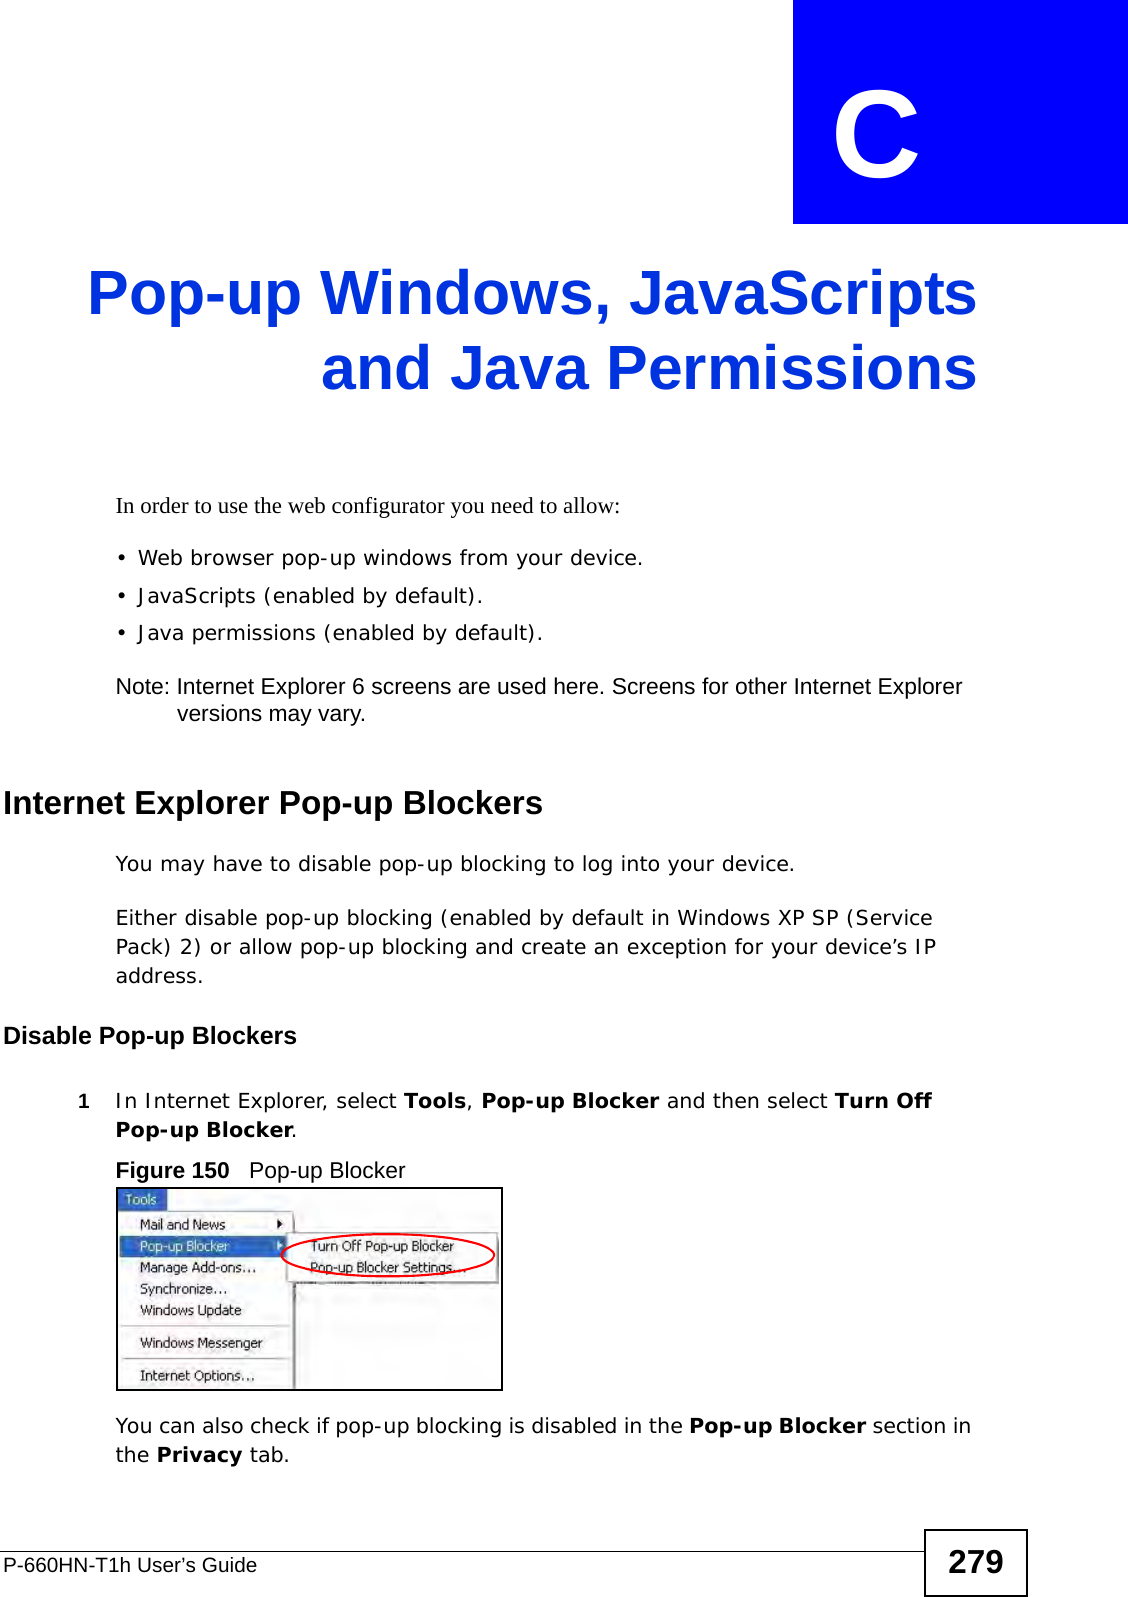 P-660HN-T1h User’s Guide 279APPENDIX  C Pop-up Windows, JavaScriptsand Java PermissionsIn order to use the web configurator you need to allow:• Web browser pop-up windows from your device.• JavaScripts (enabled by default).• Java permissions (enabled by default).Note: Internet Explorer 6 screens are used here. Screens for other Internet Explorer versions may vary.Internet Explorer Pop-up BlockersYou may have to disable pop-up blocking to log into your device. Either disable pop-up blocking (enabled by default in Windows XP SP (Service Pack) 2) or allow pop-up blocking and create an exception for your device’s IP address.Disable Pop-up Blockers1In Internet Explorer, select Tools, Pop-up Blocker and then select Turn Off Pop-up Blocker. Figure 150   Pop-up BlockerYou can also check if pop-up blocking is disabled in the Pop-up Blocker section in the Privacy tab. 